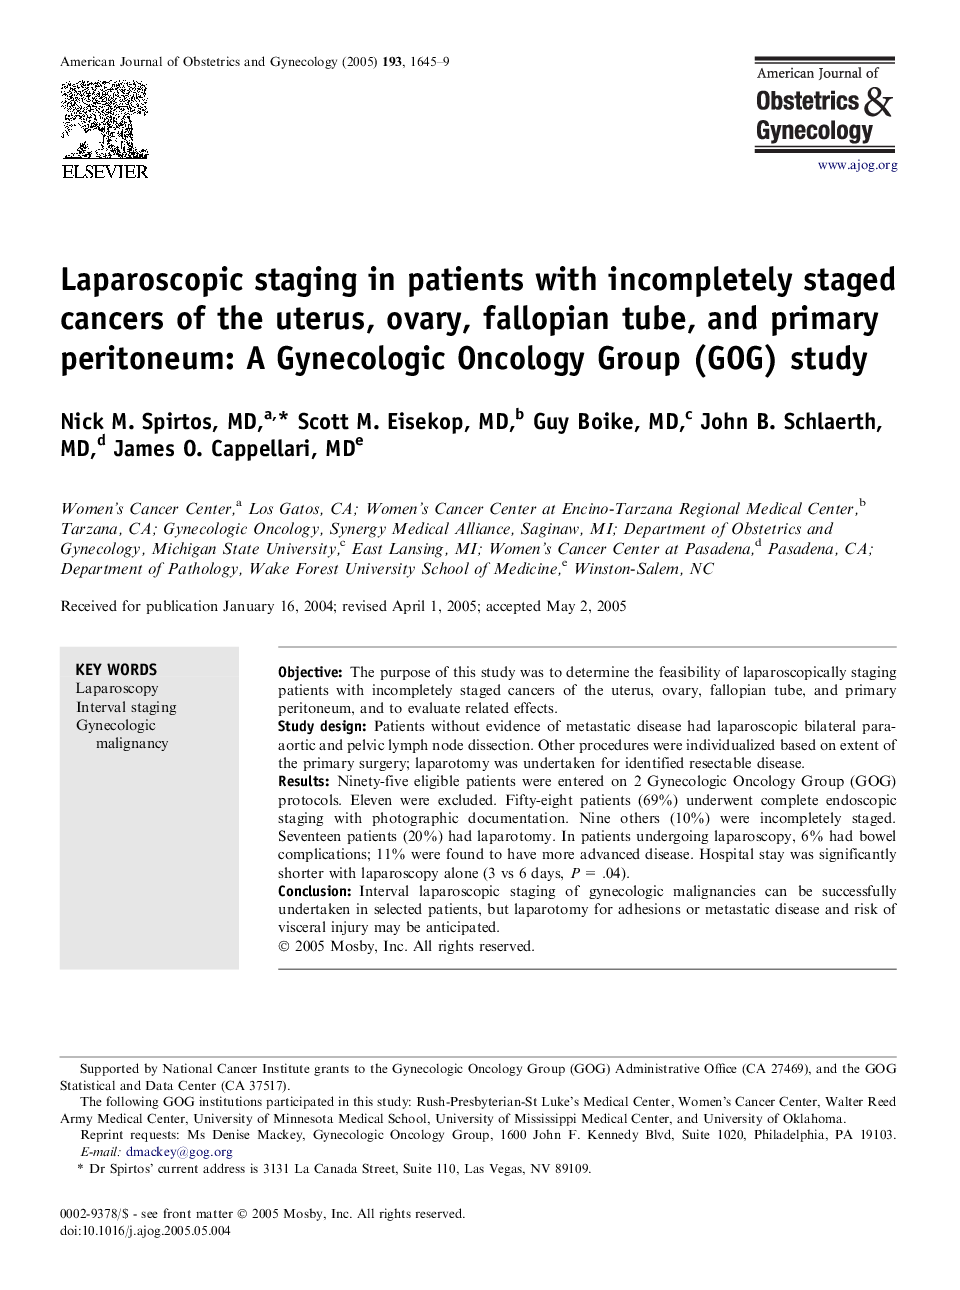 Laparoscopic staging in patients with incompletely staged cancers of the uterus, ovary, fallopian tube, and primary peritoneum: A Gynecologic Oncology Group (GOG) study